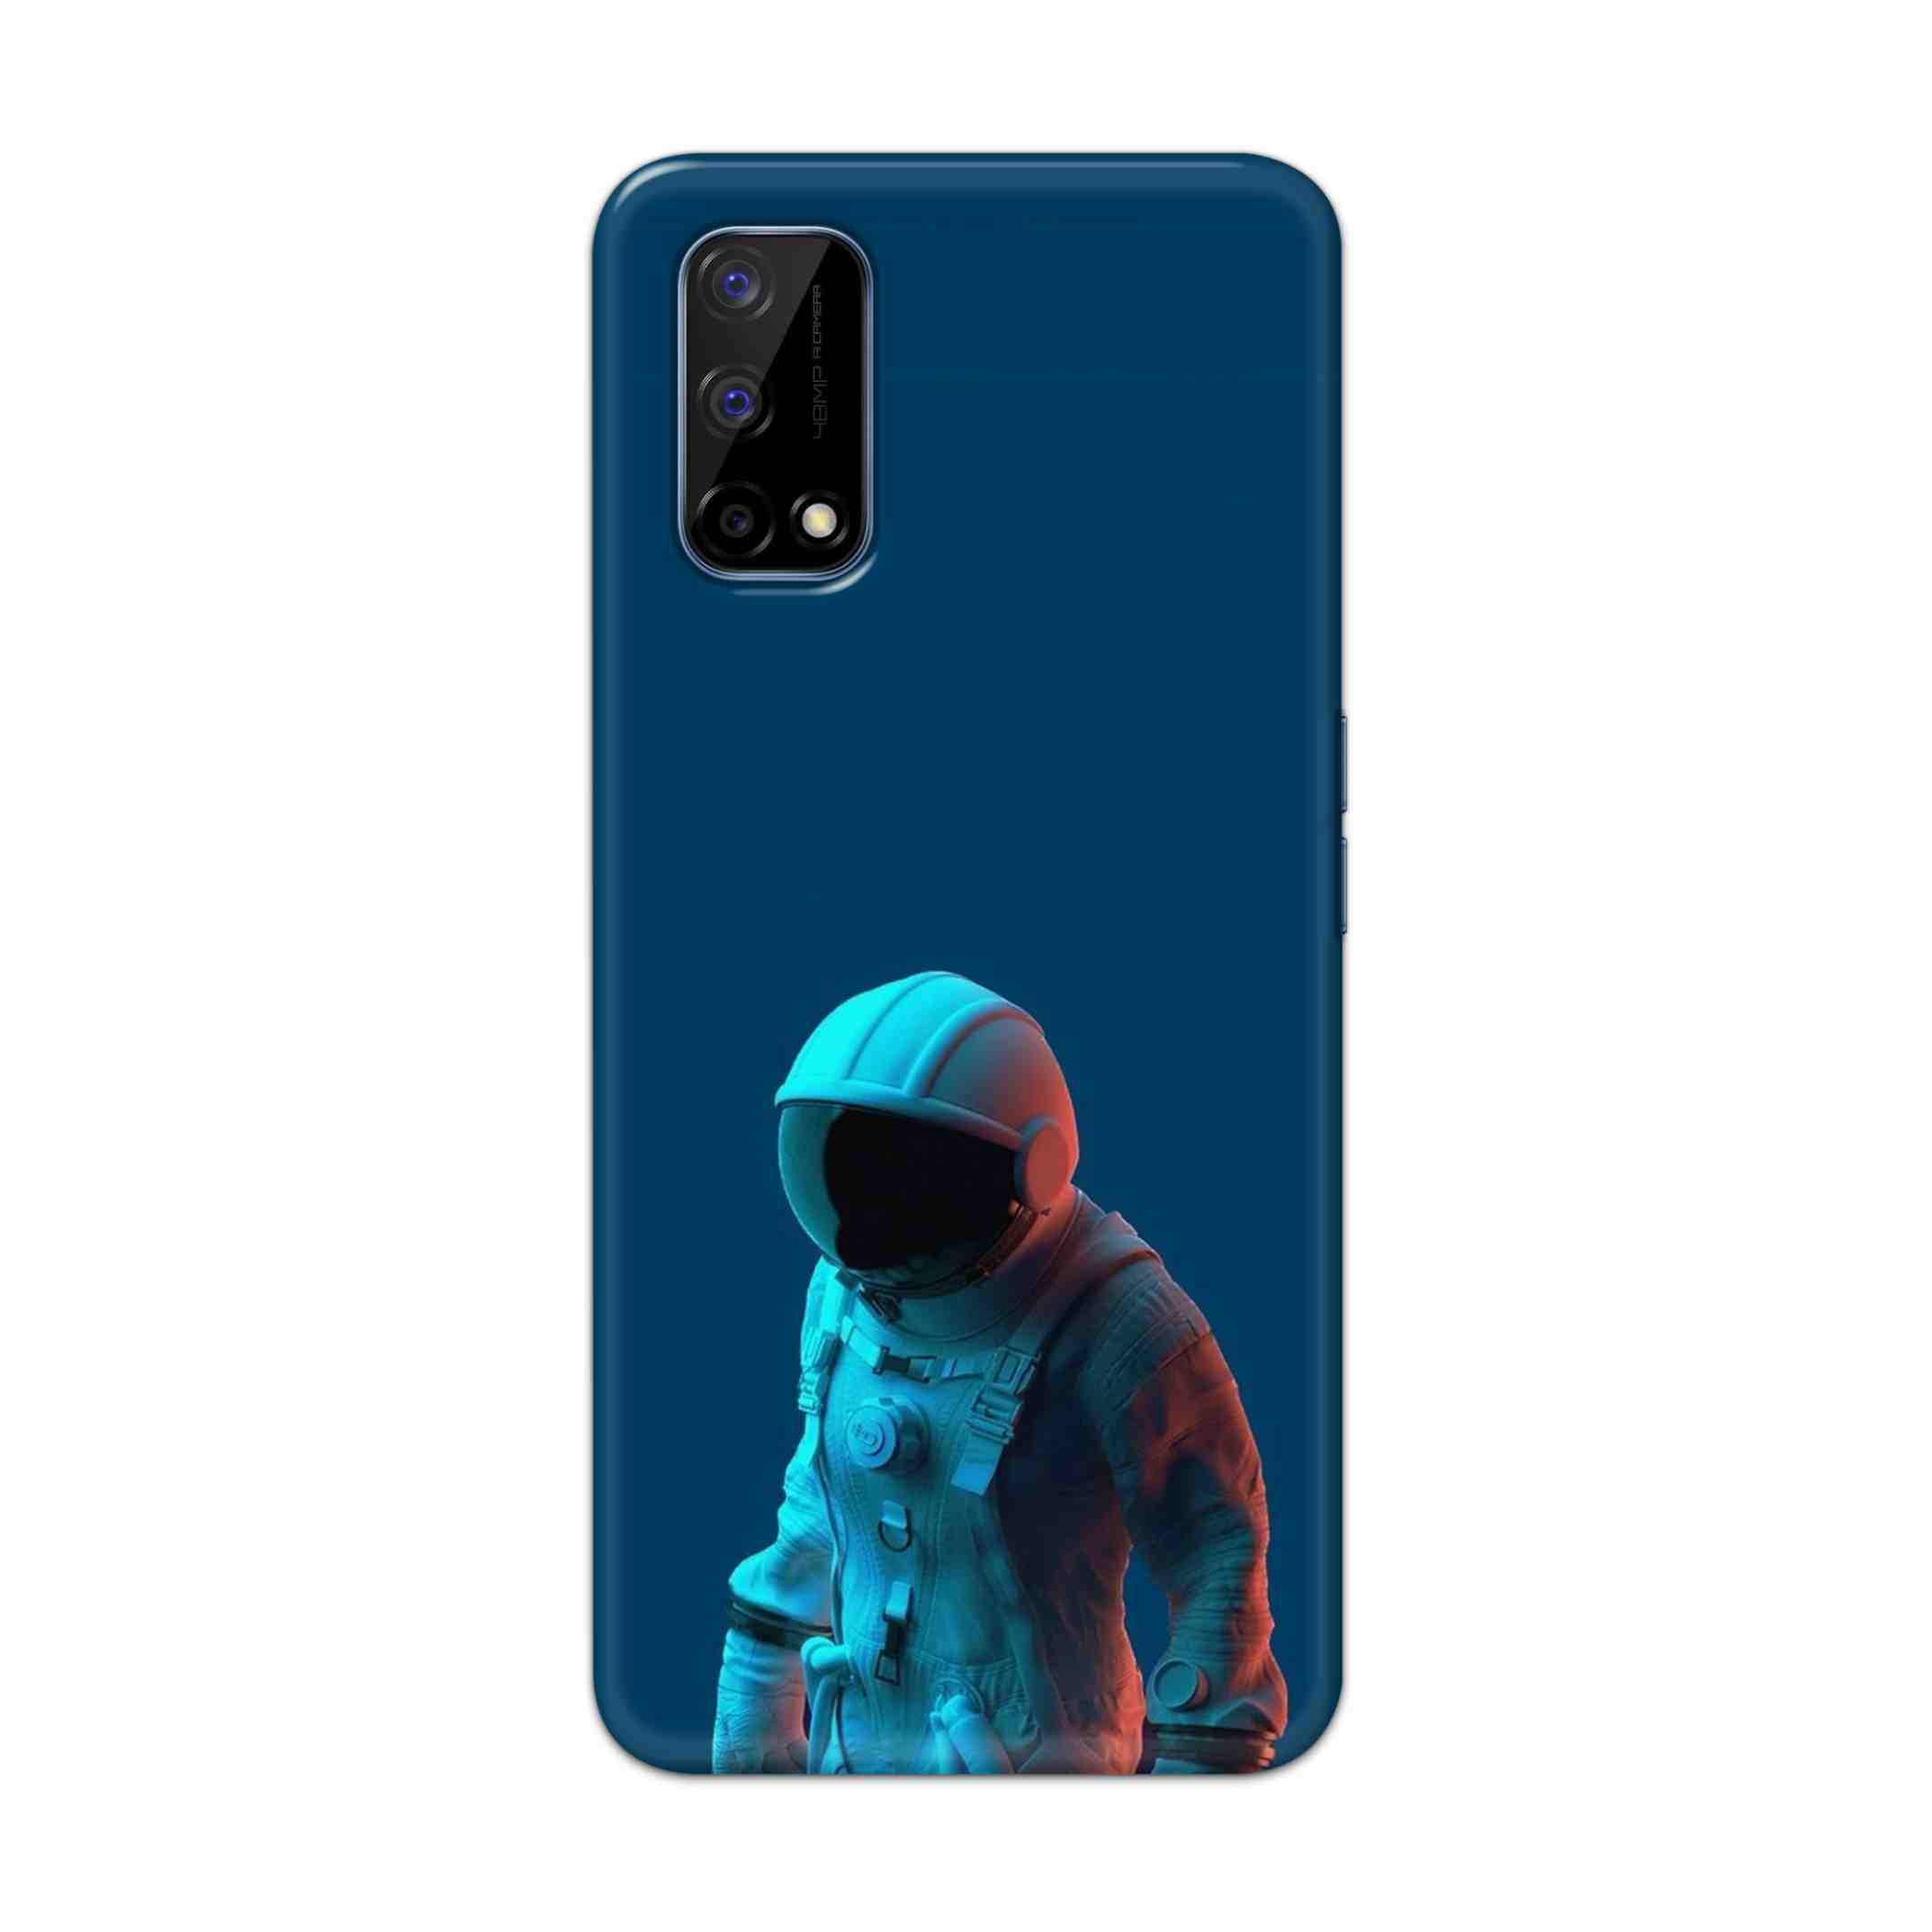 Buy Blue Astronaut Hard Back Mobile Phone Case Cover For Realme Narzo 30 Pro Online